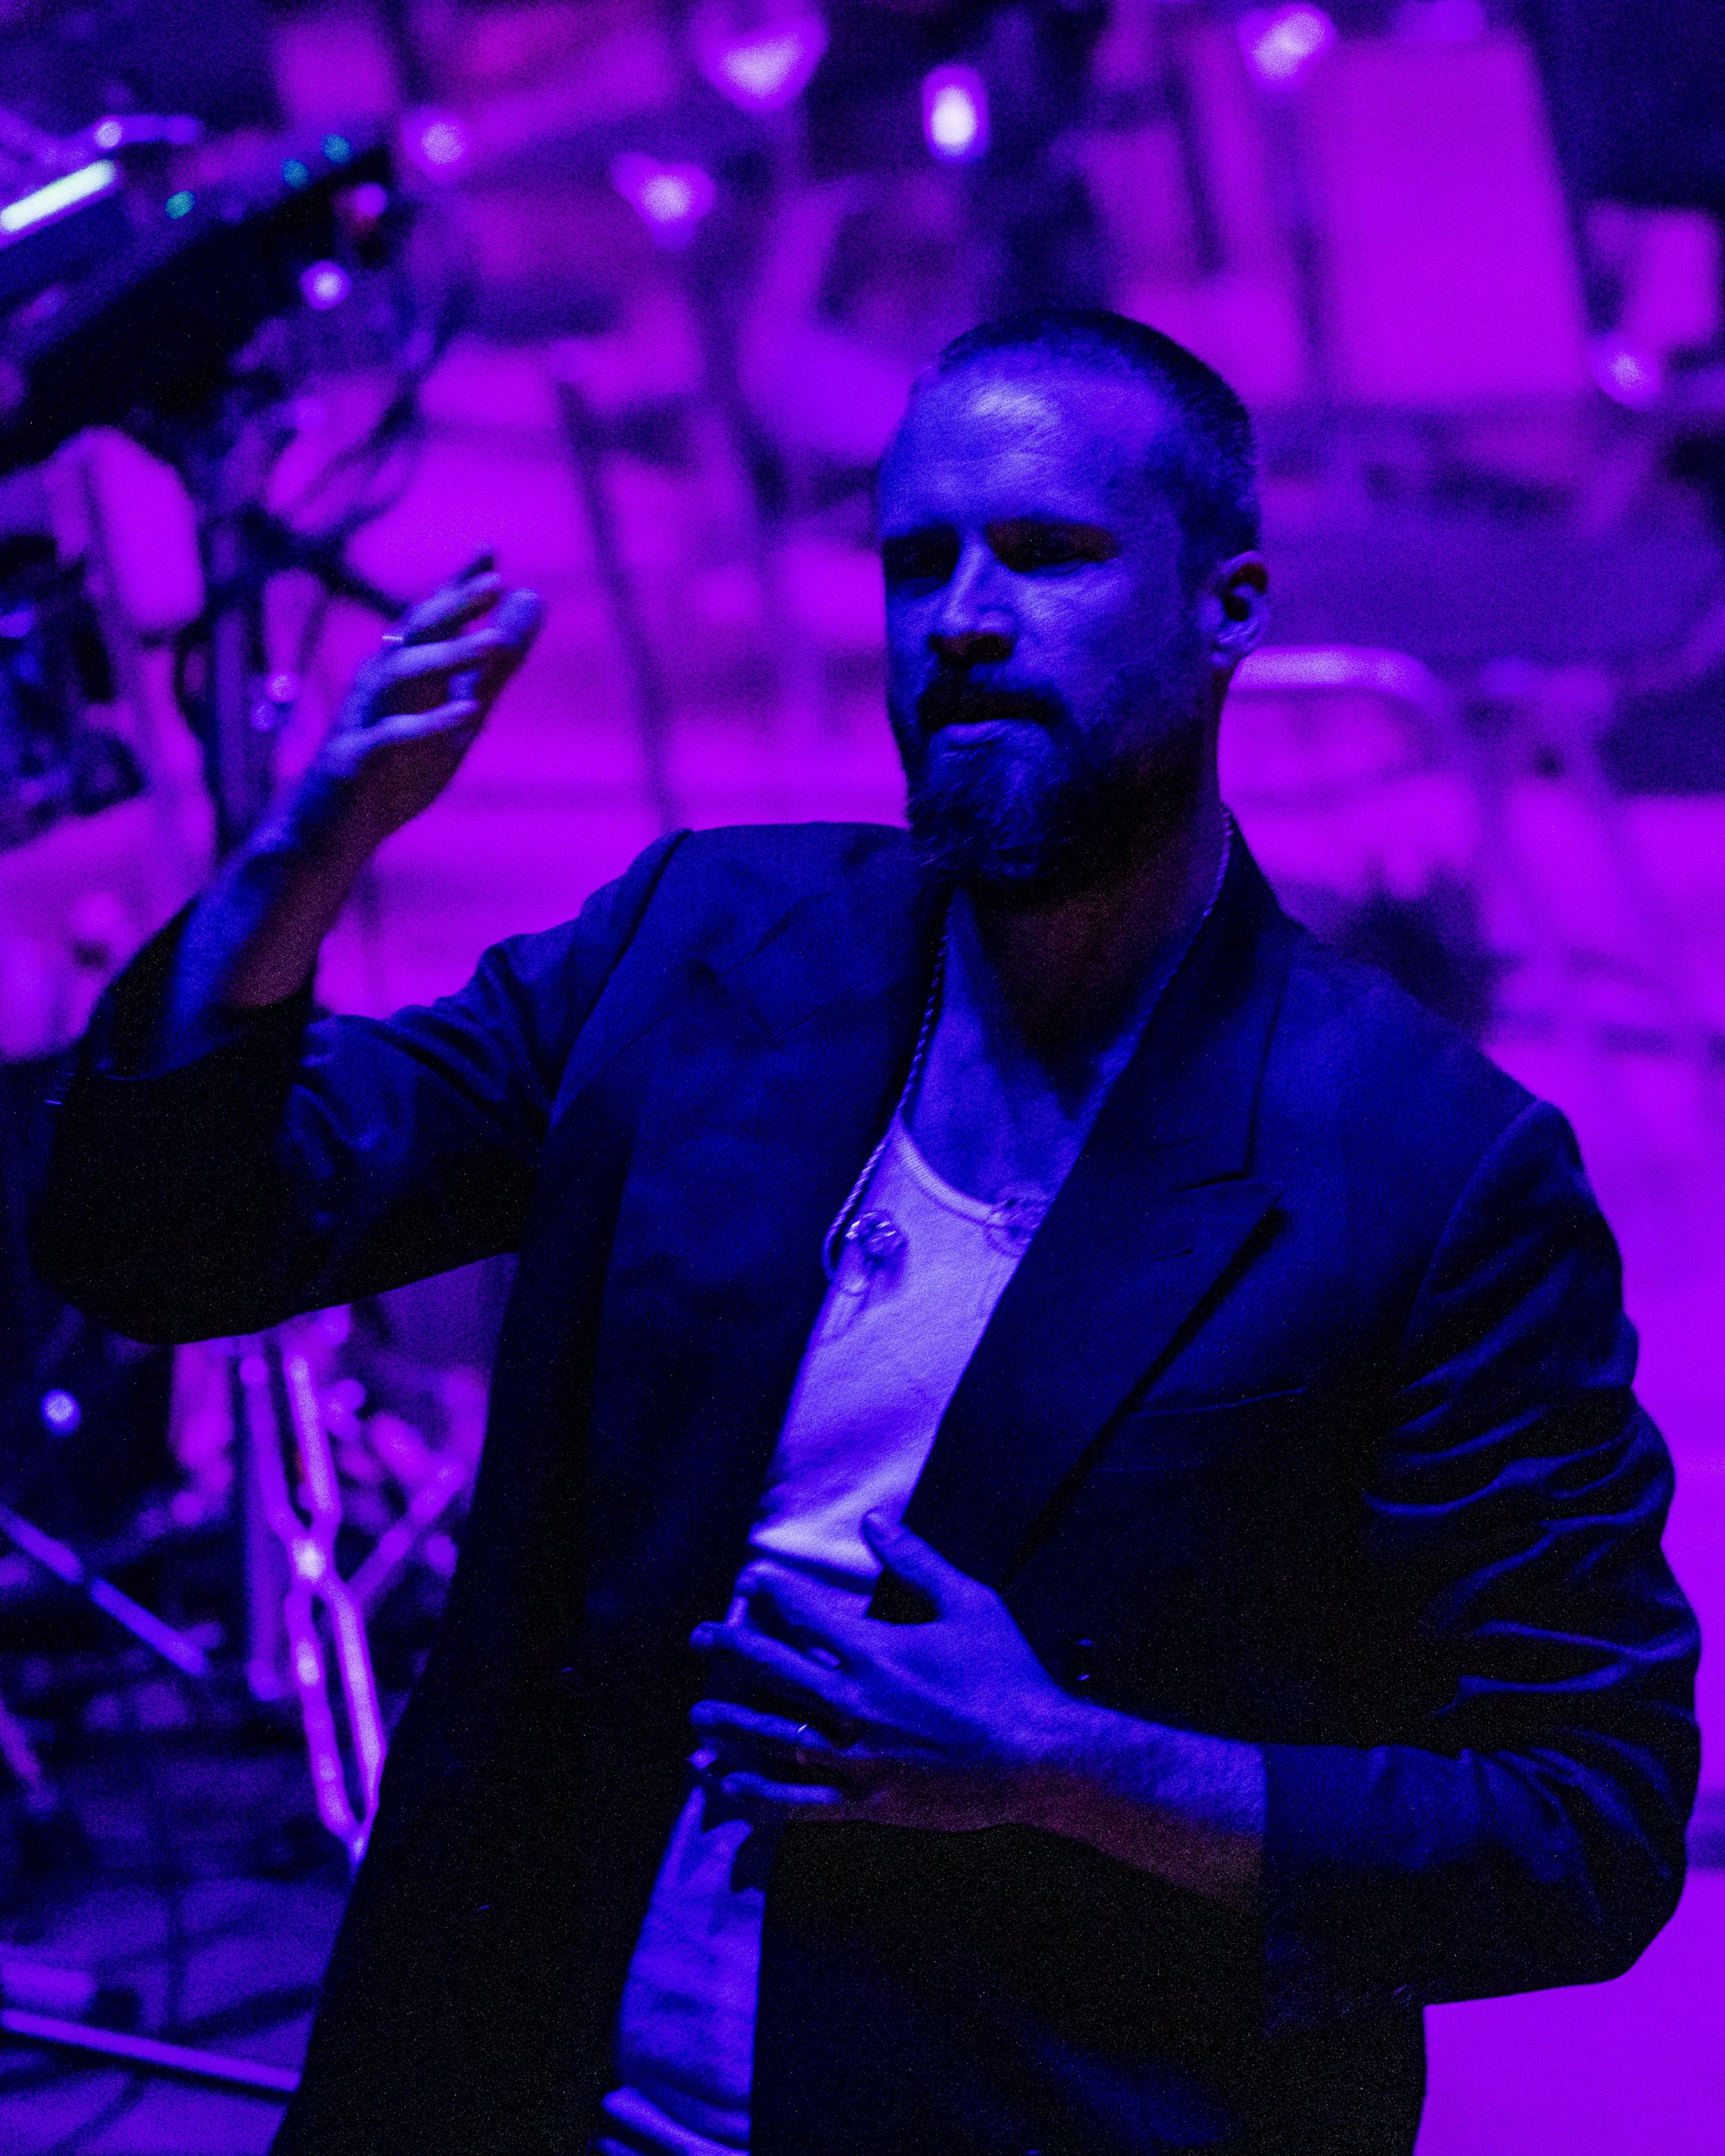 FATHER JOHN MISTY WITH THE COLORADO SYMPHONY - Red Rocks Amphitheatre - Morrison, Colorado - Sunday, July 31, 2022 - PHOTO BY Mowgli Miles of Interracial Friends-88.JPG